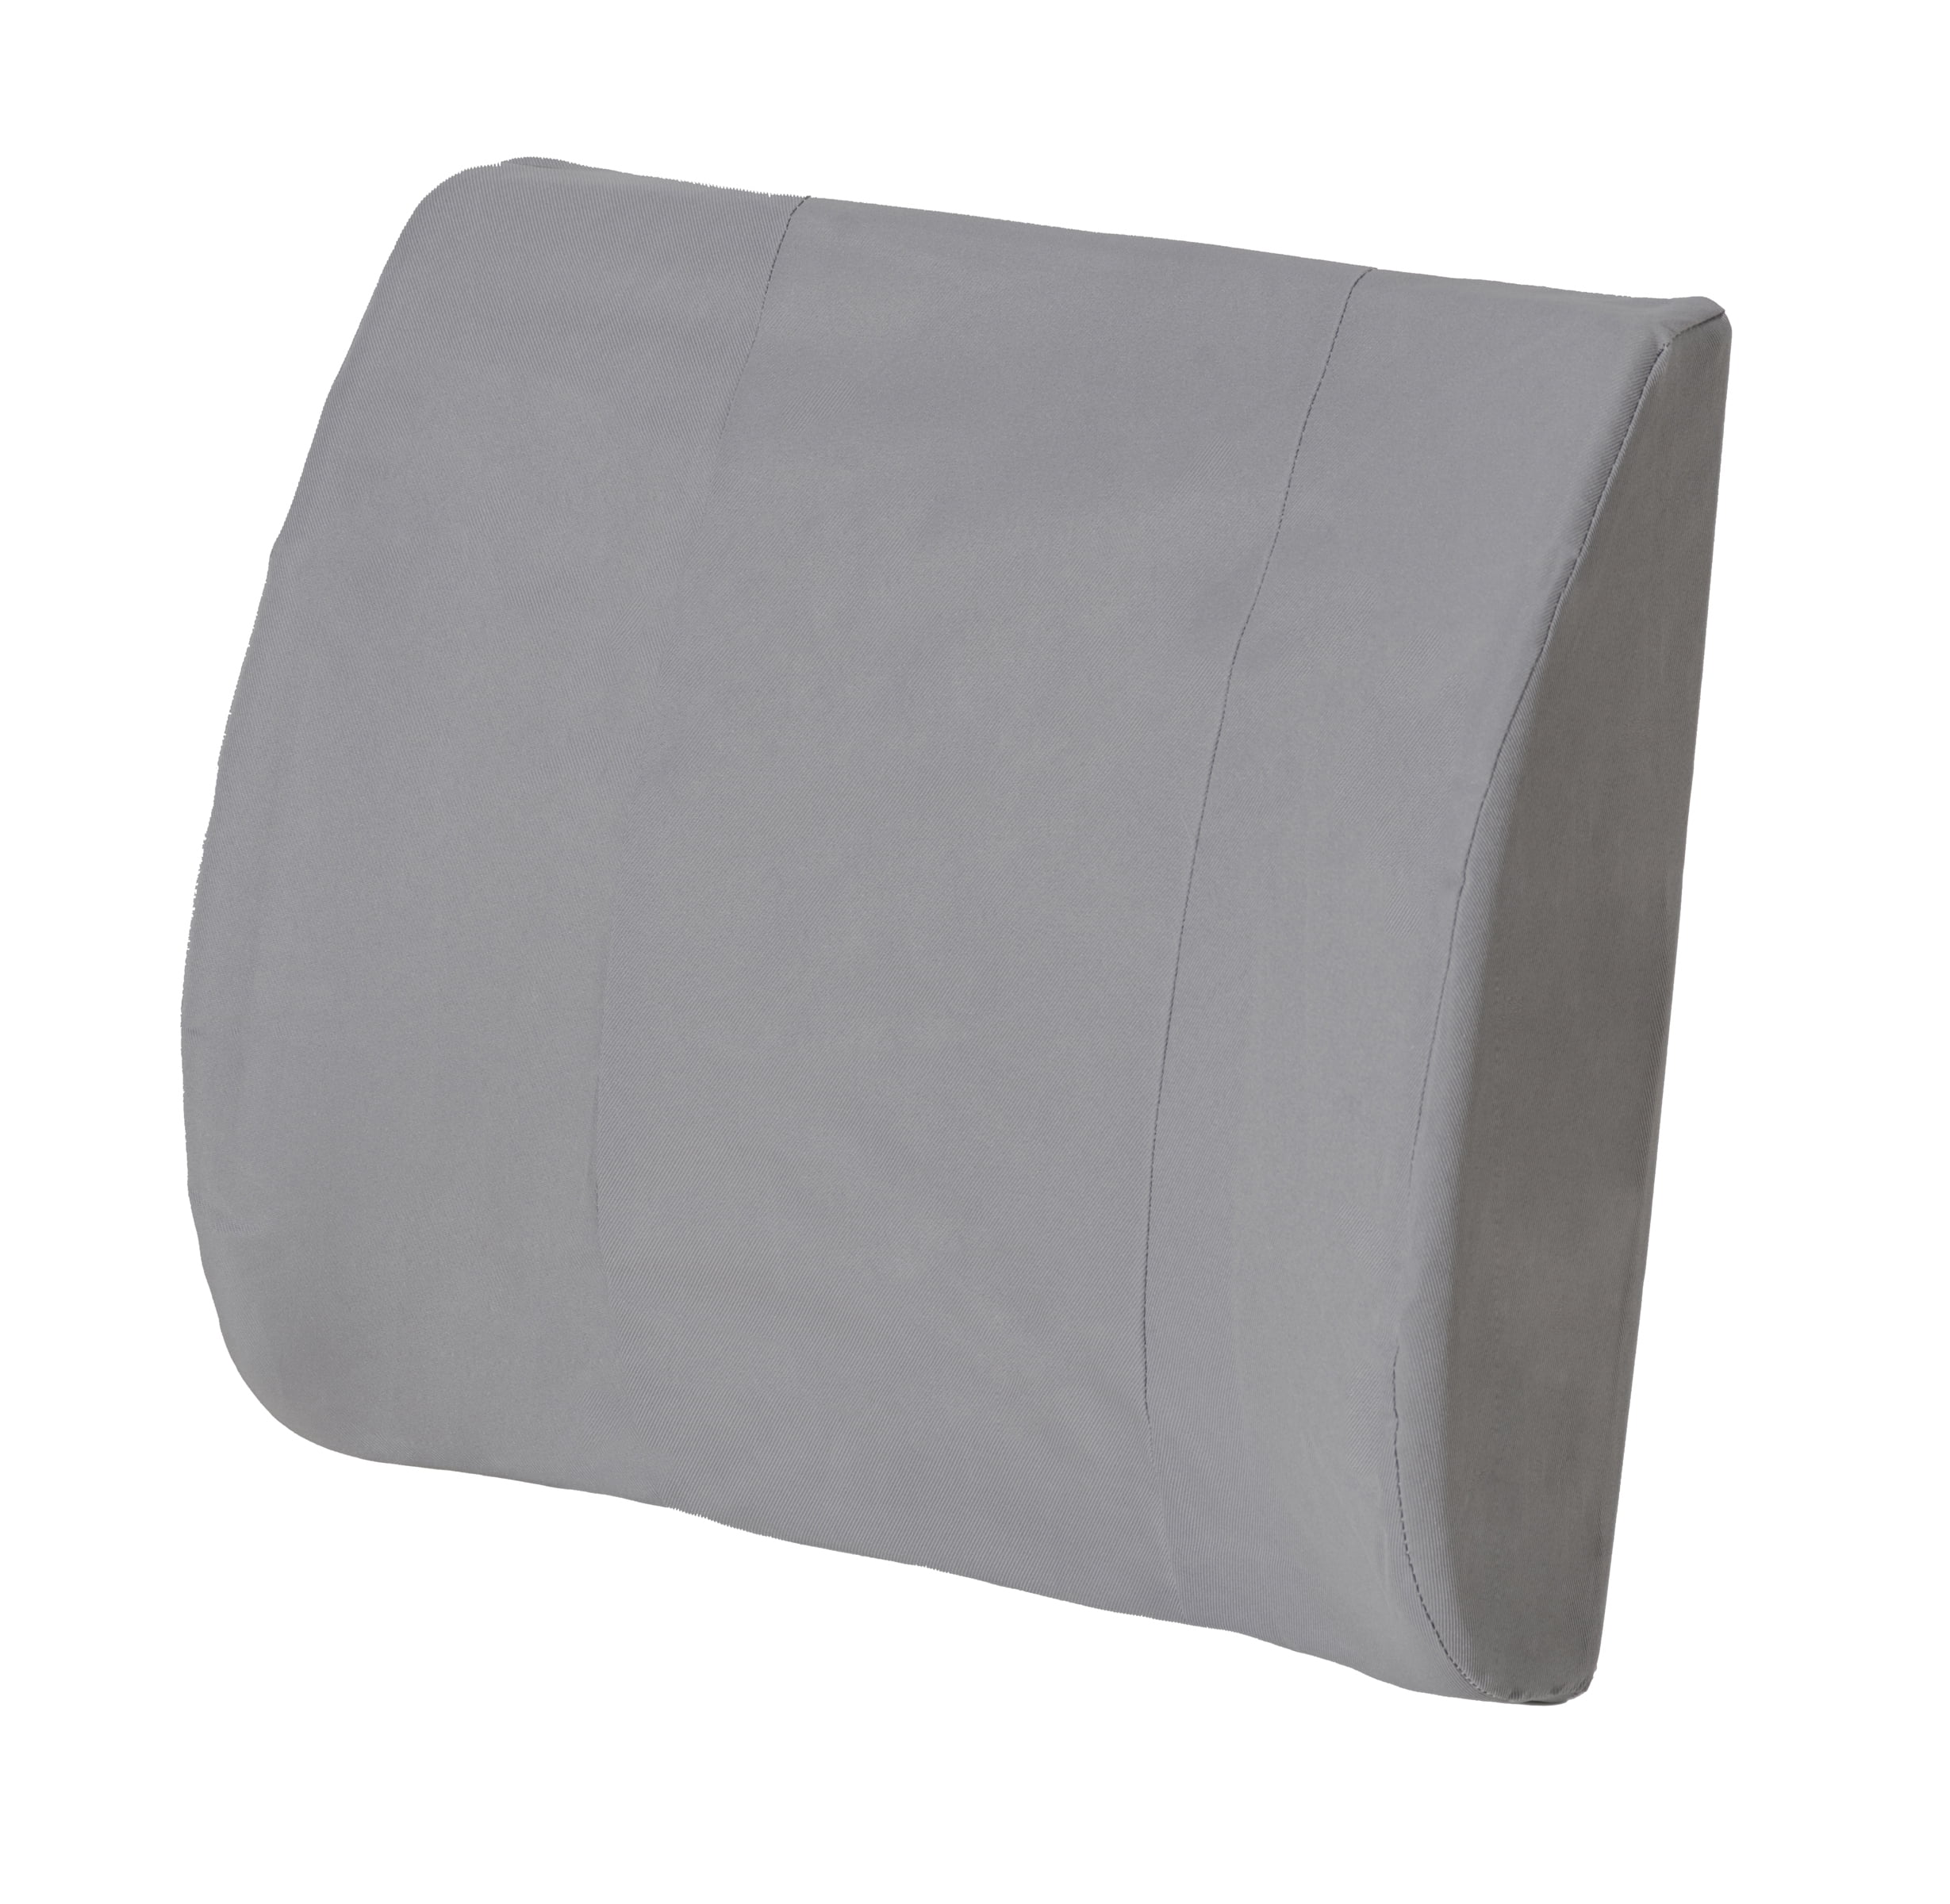 Essential® - Orthopedic Soft Hip Support Pillow – thessentialshops